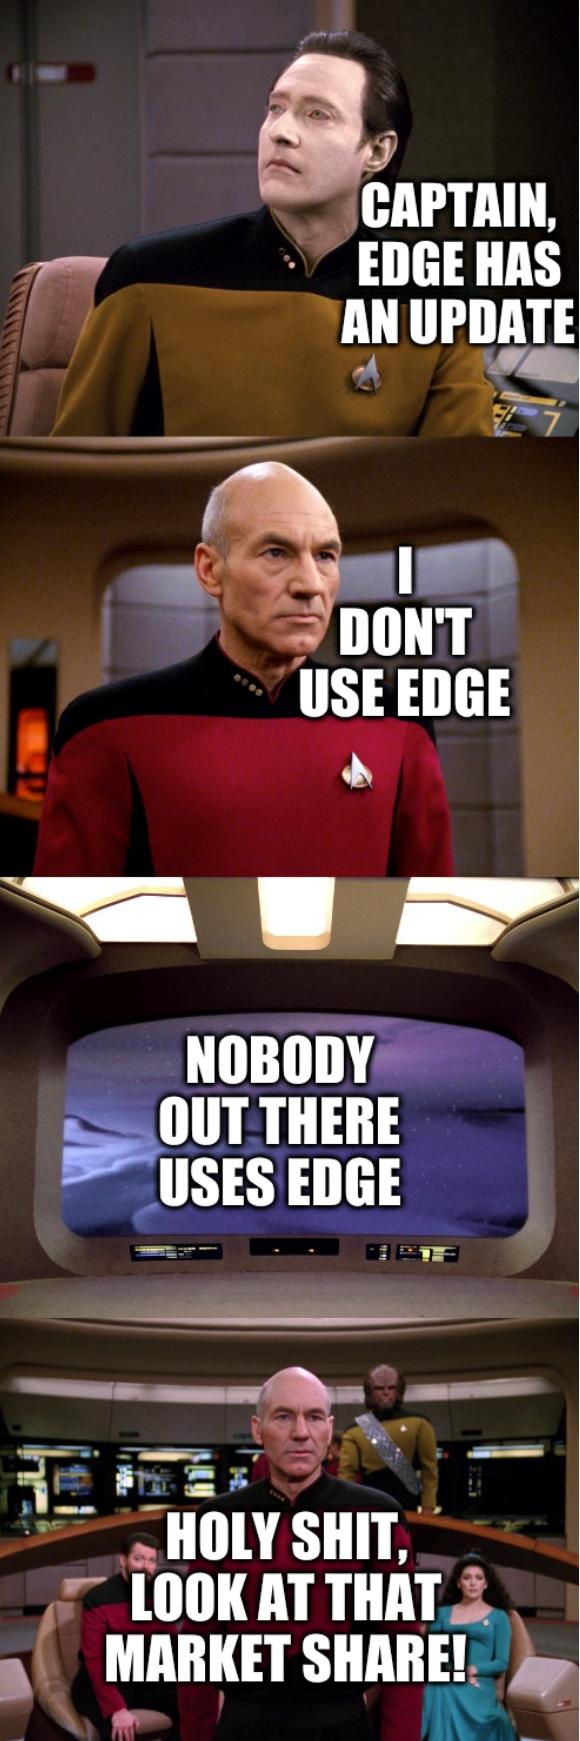 Picard View Screen: Captain, Edge has an update, I don't use Edge, Nobody out there uses Edge, Holy shit, look at that market share!